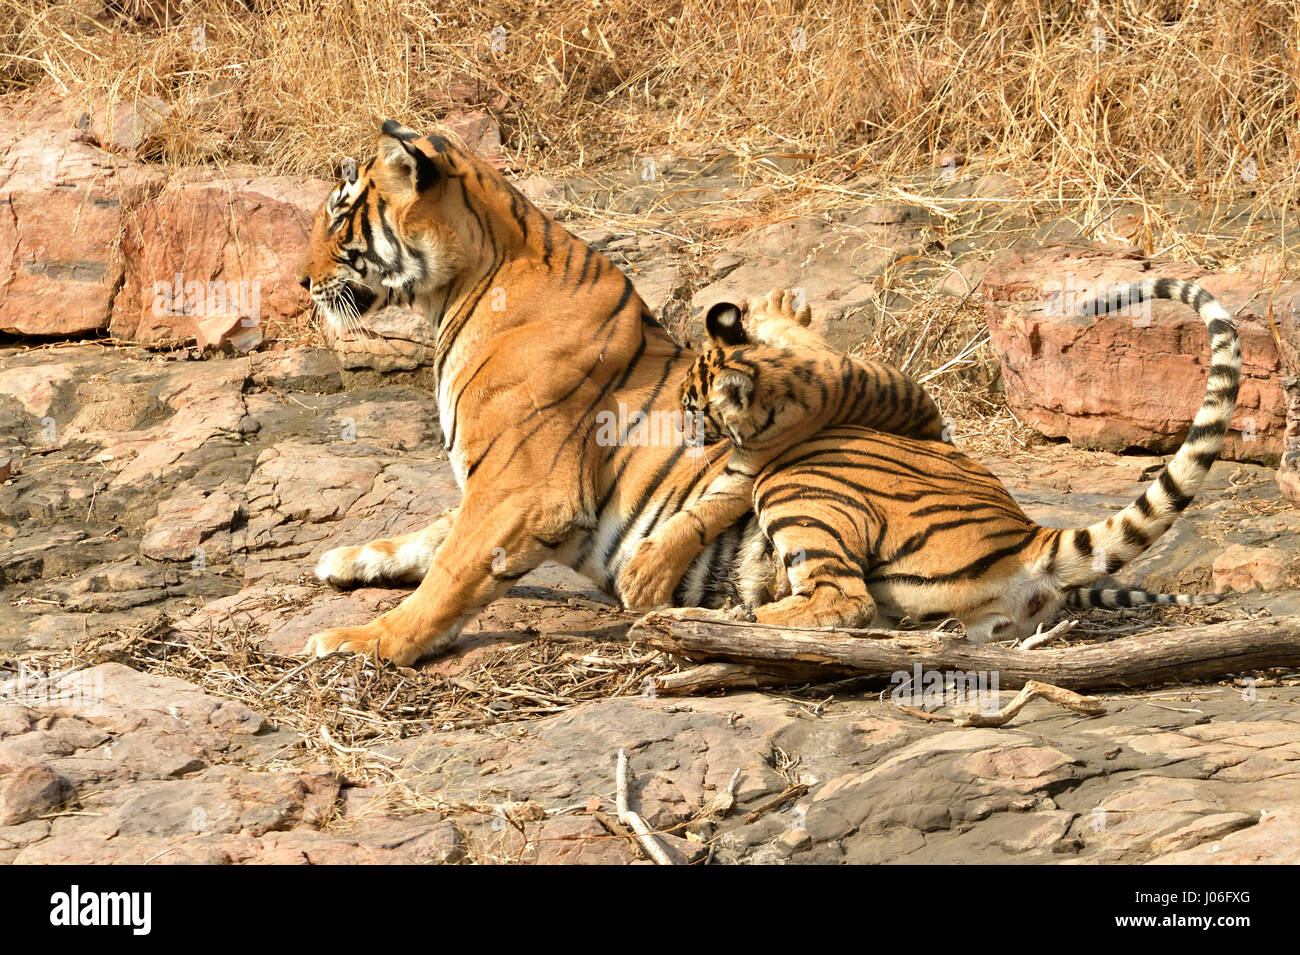 Bengal tiger, mother and cub, playing on a rocky outcrop in Ranthambhore tiger reserve, India Stock Photo